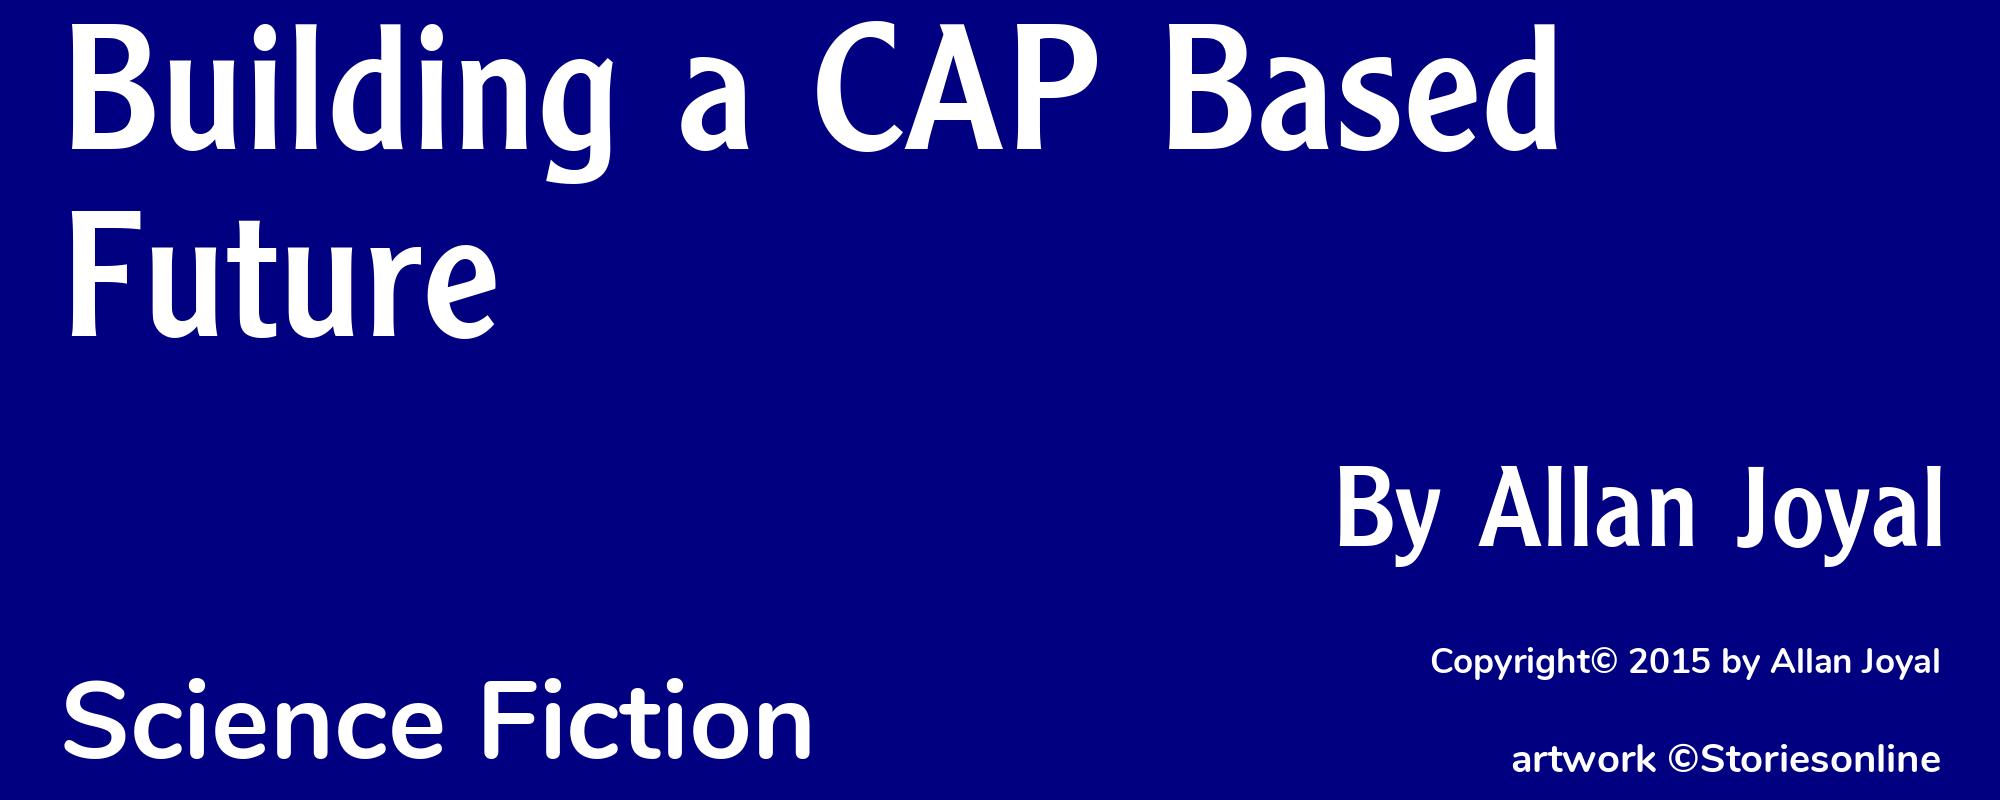 Building a CAP Based Future - Cover